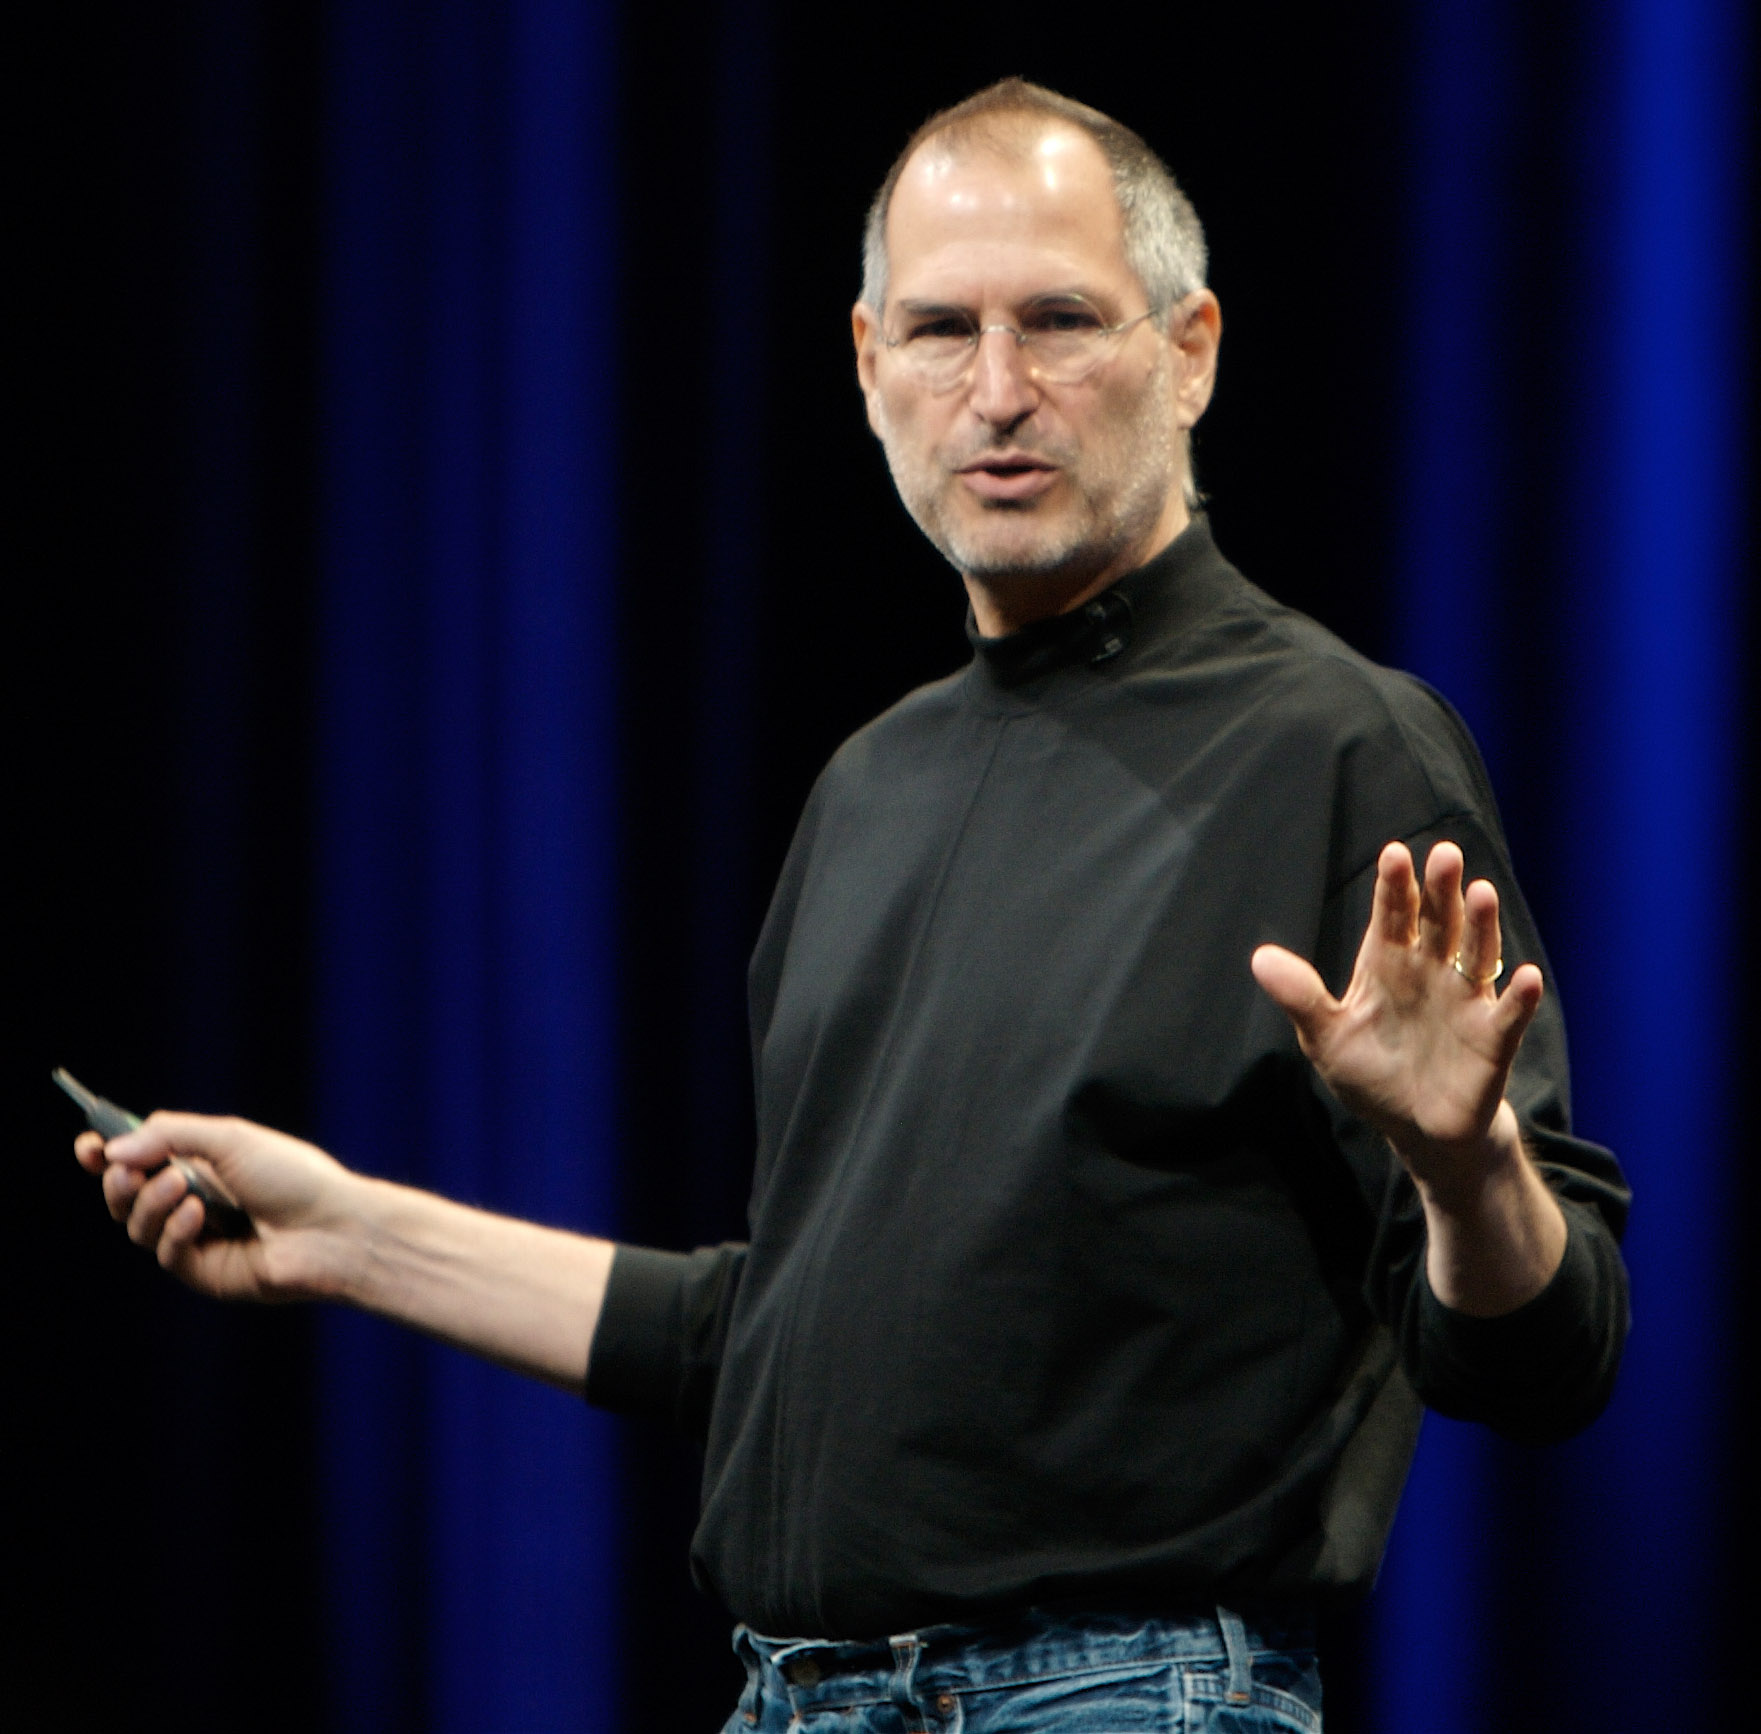 Steve Jobs Resigns From Apple Today | Keep the Peak Unique